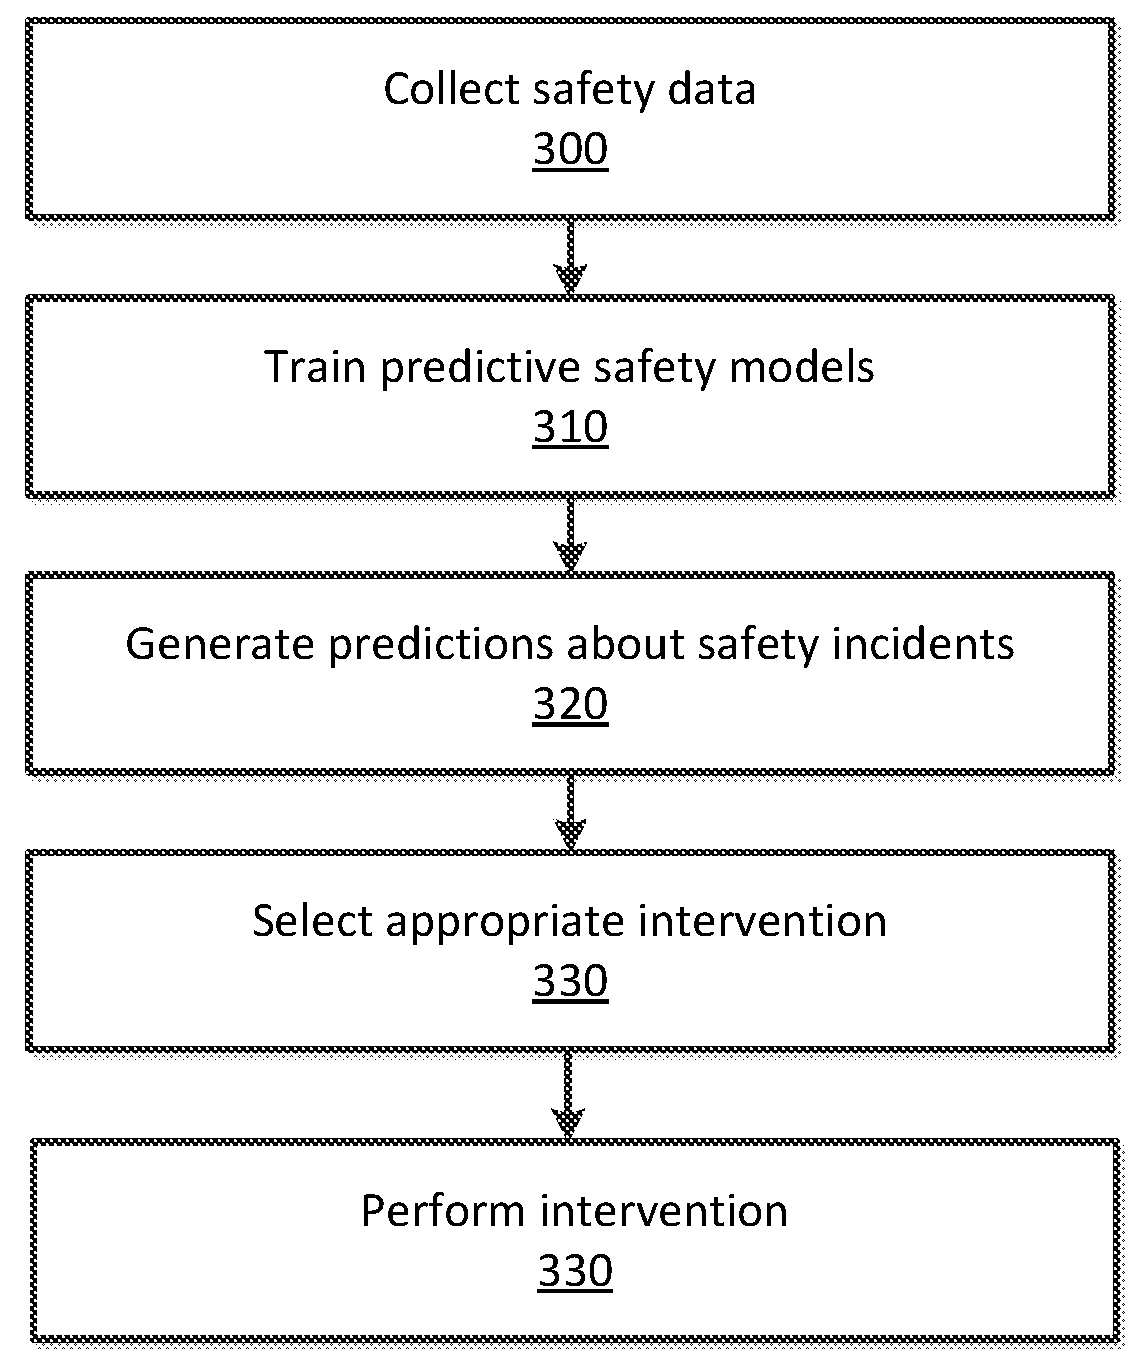 Predicting safety incidents using machine learning